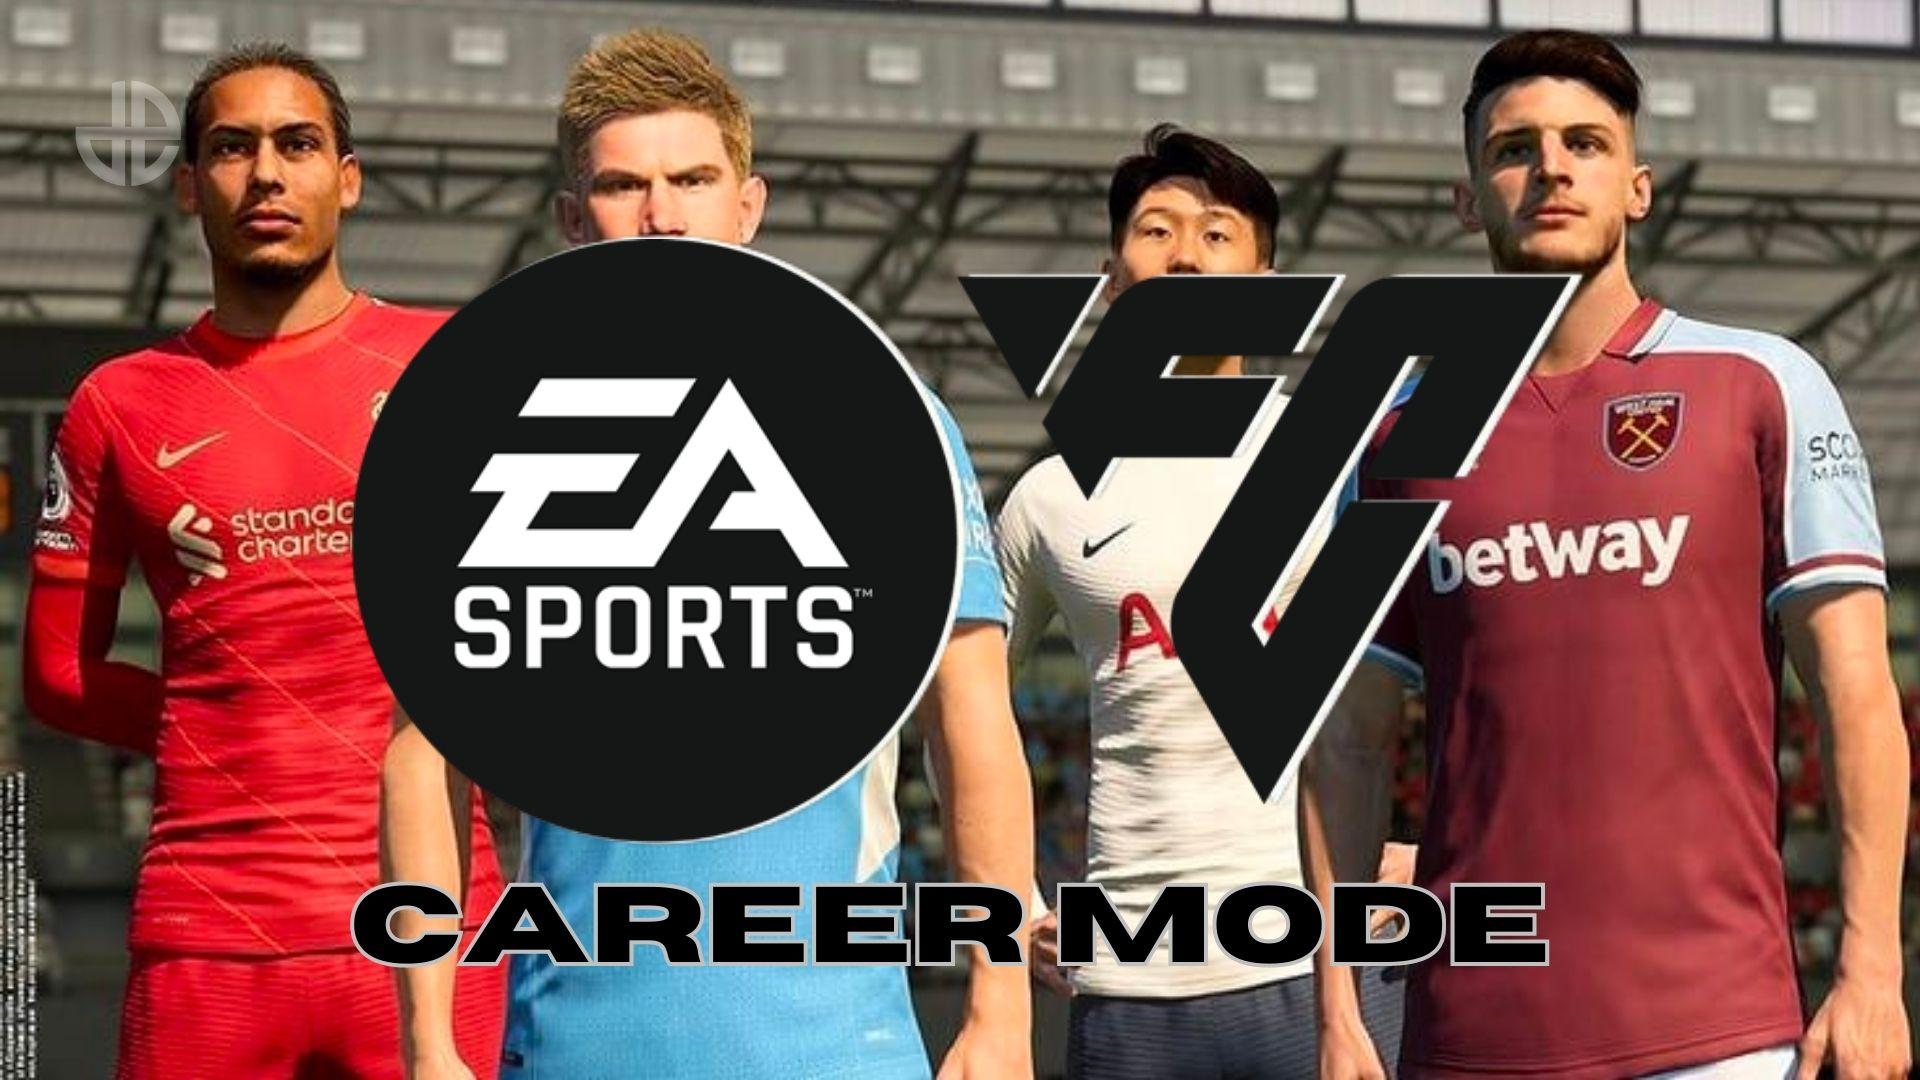 Van Dijk, De Bruyne, Son, and Declan Rice in FIFA 23 with EA SPORTS FC logo and career mode text